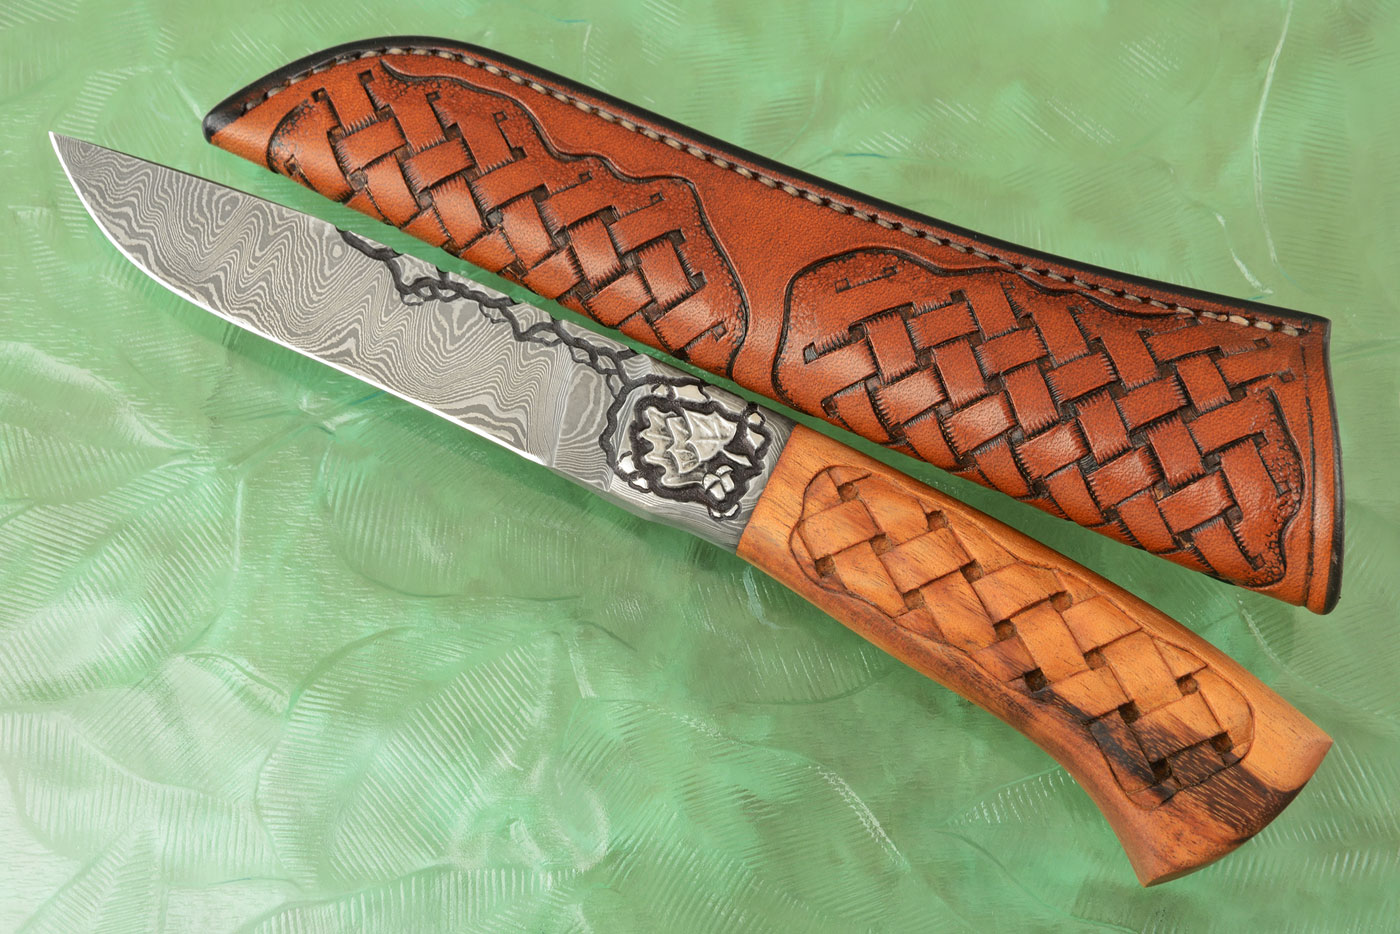 Oak and Acorns: Integral Damascus Utility with Carved Tigerwood